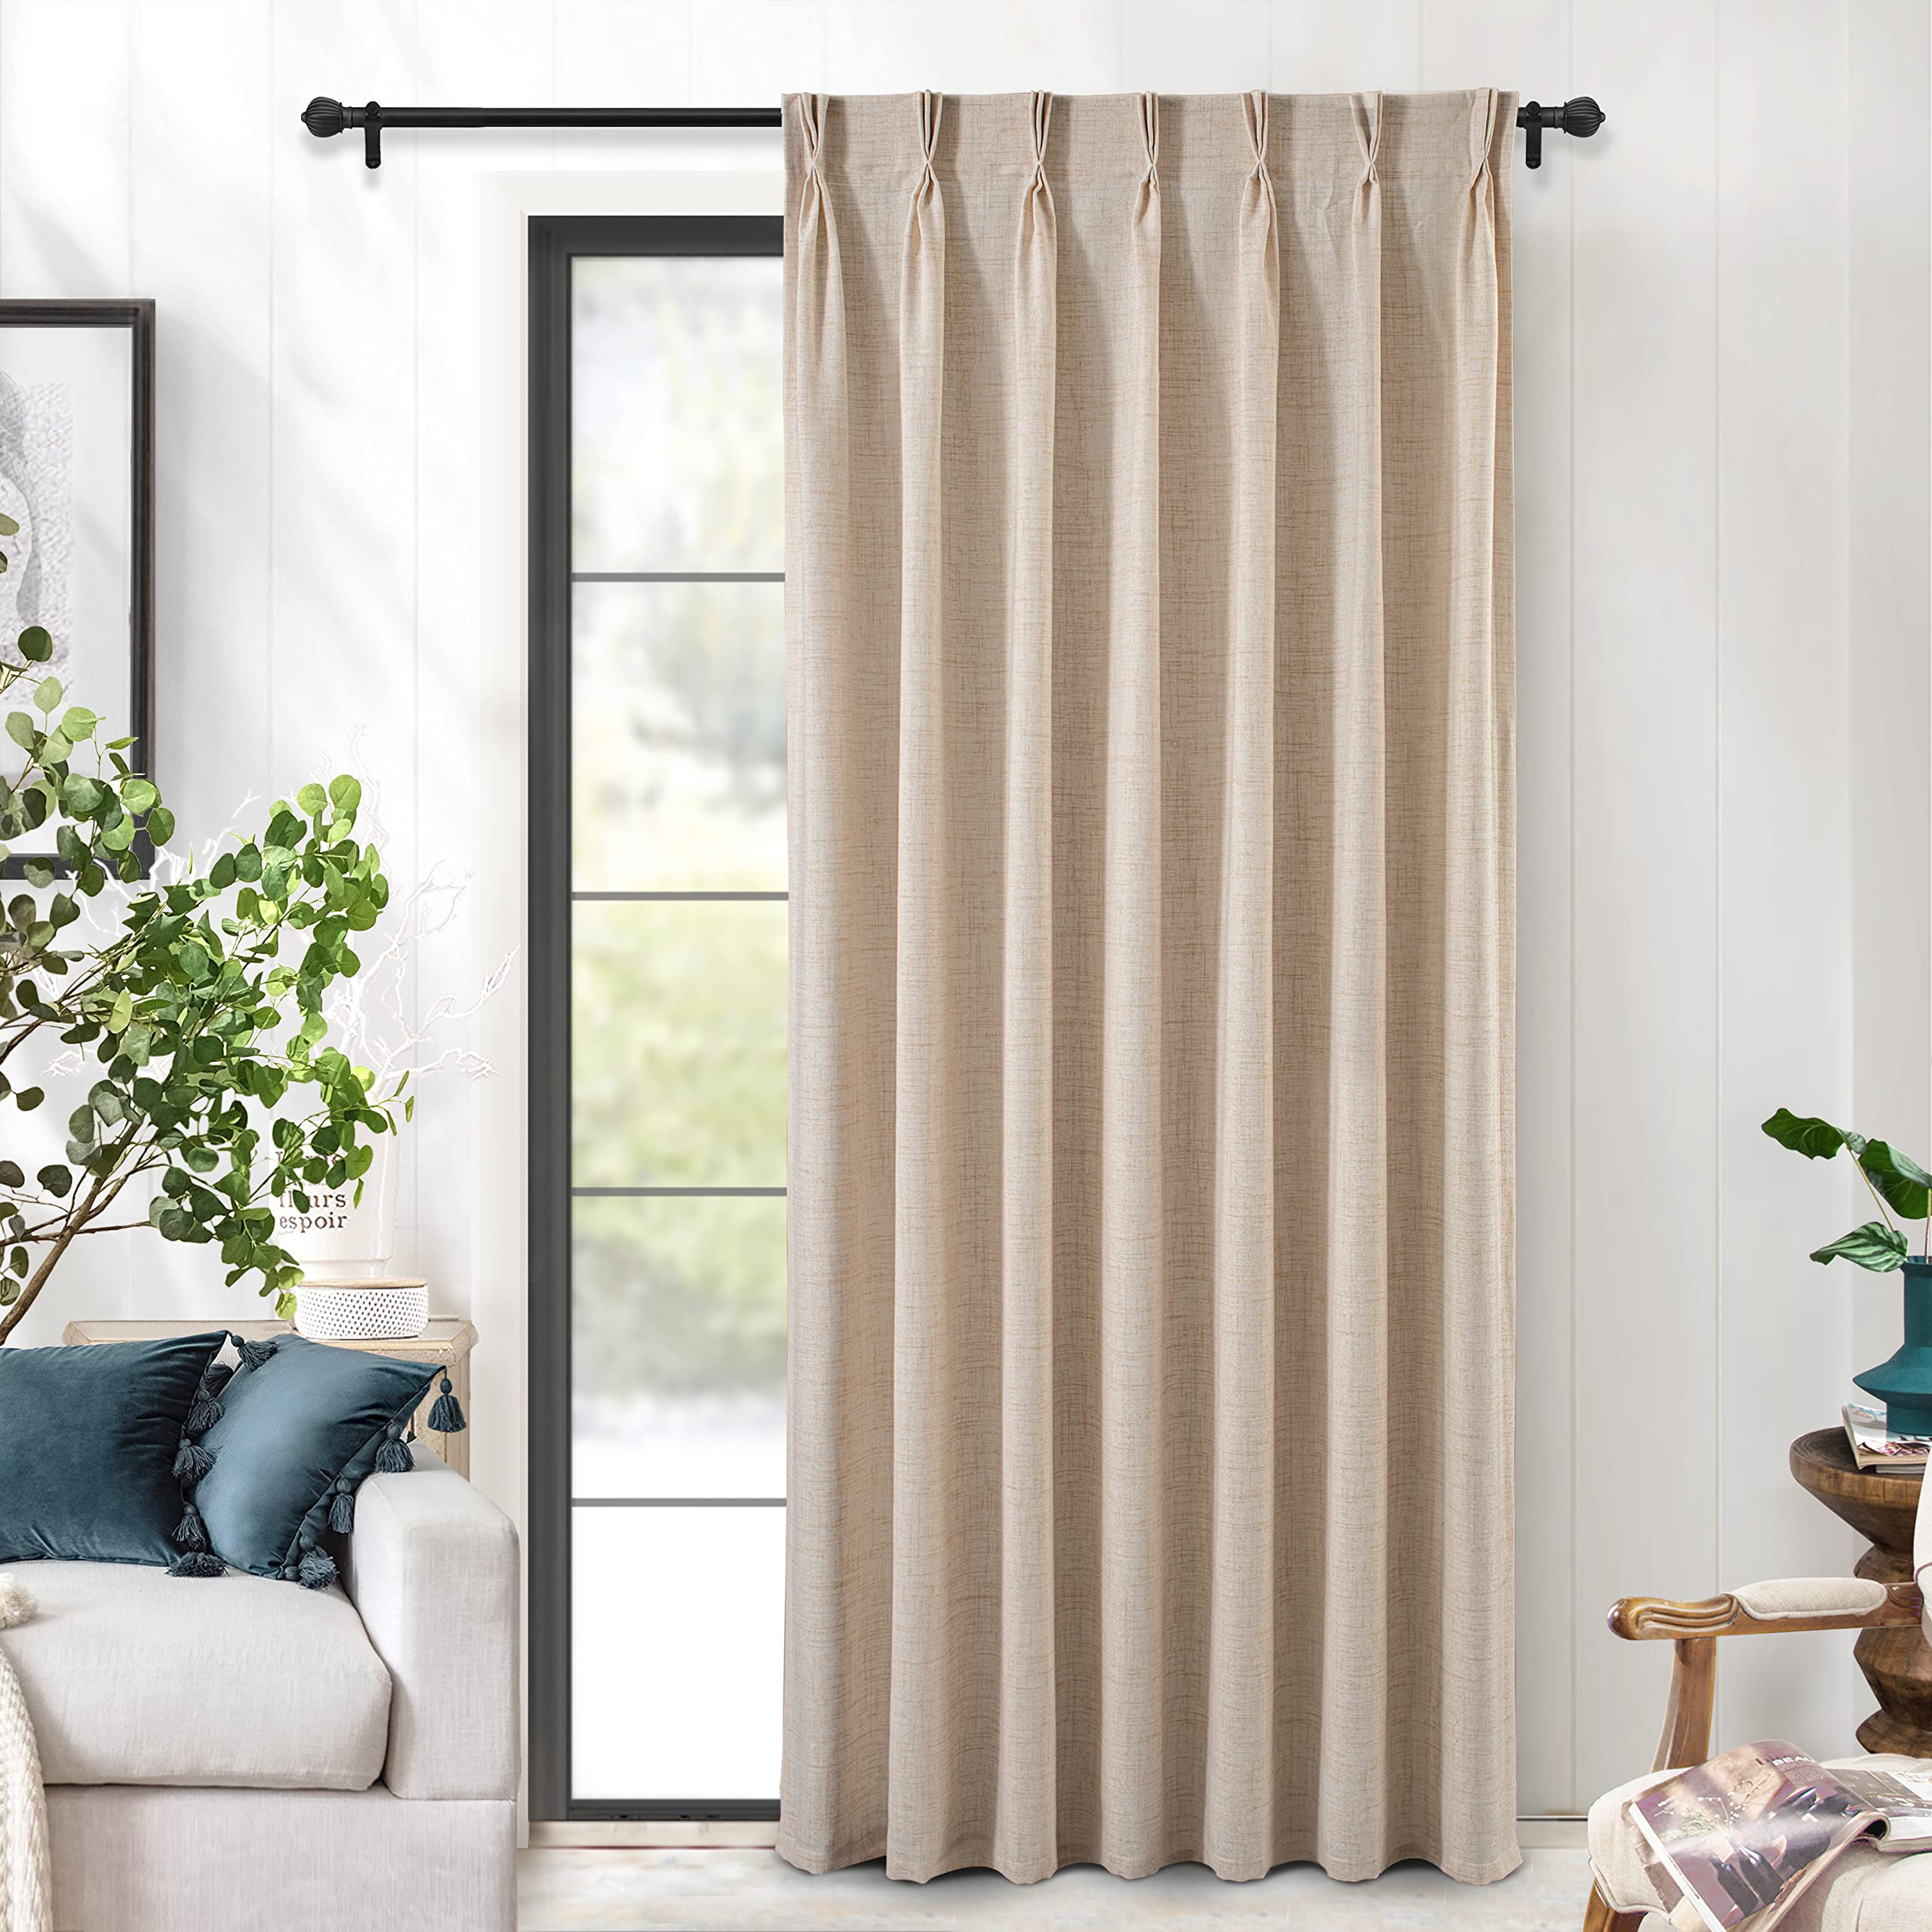 North Hills Home Striped Sheer Curtains for Living Room, Linen Texture